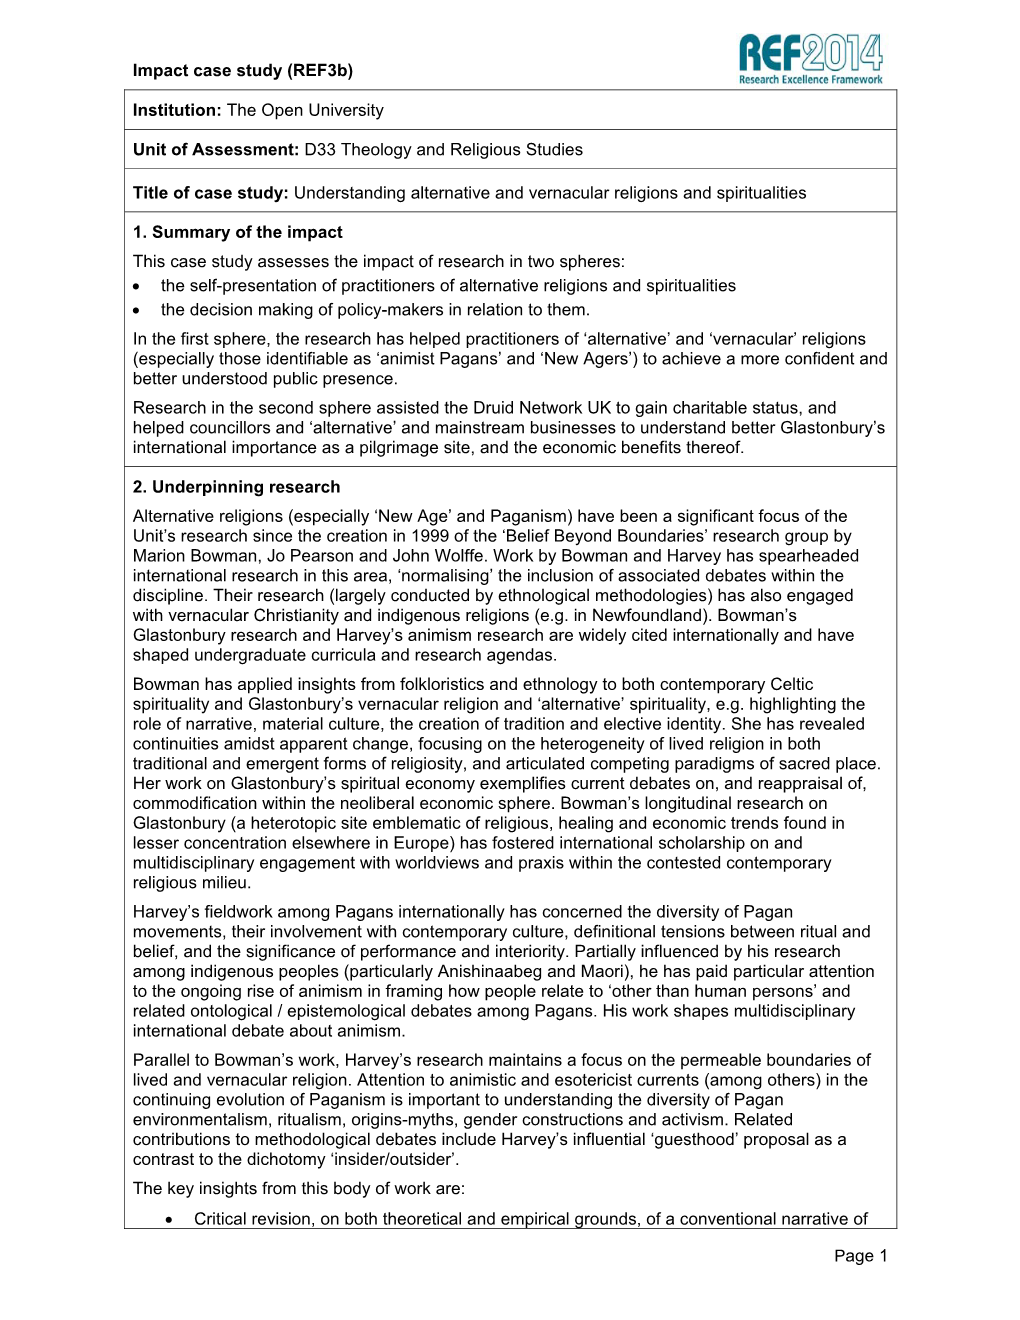 Impact Case Study (Ref3b) Page 1 Institution: the Open University Unit